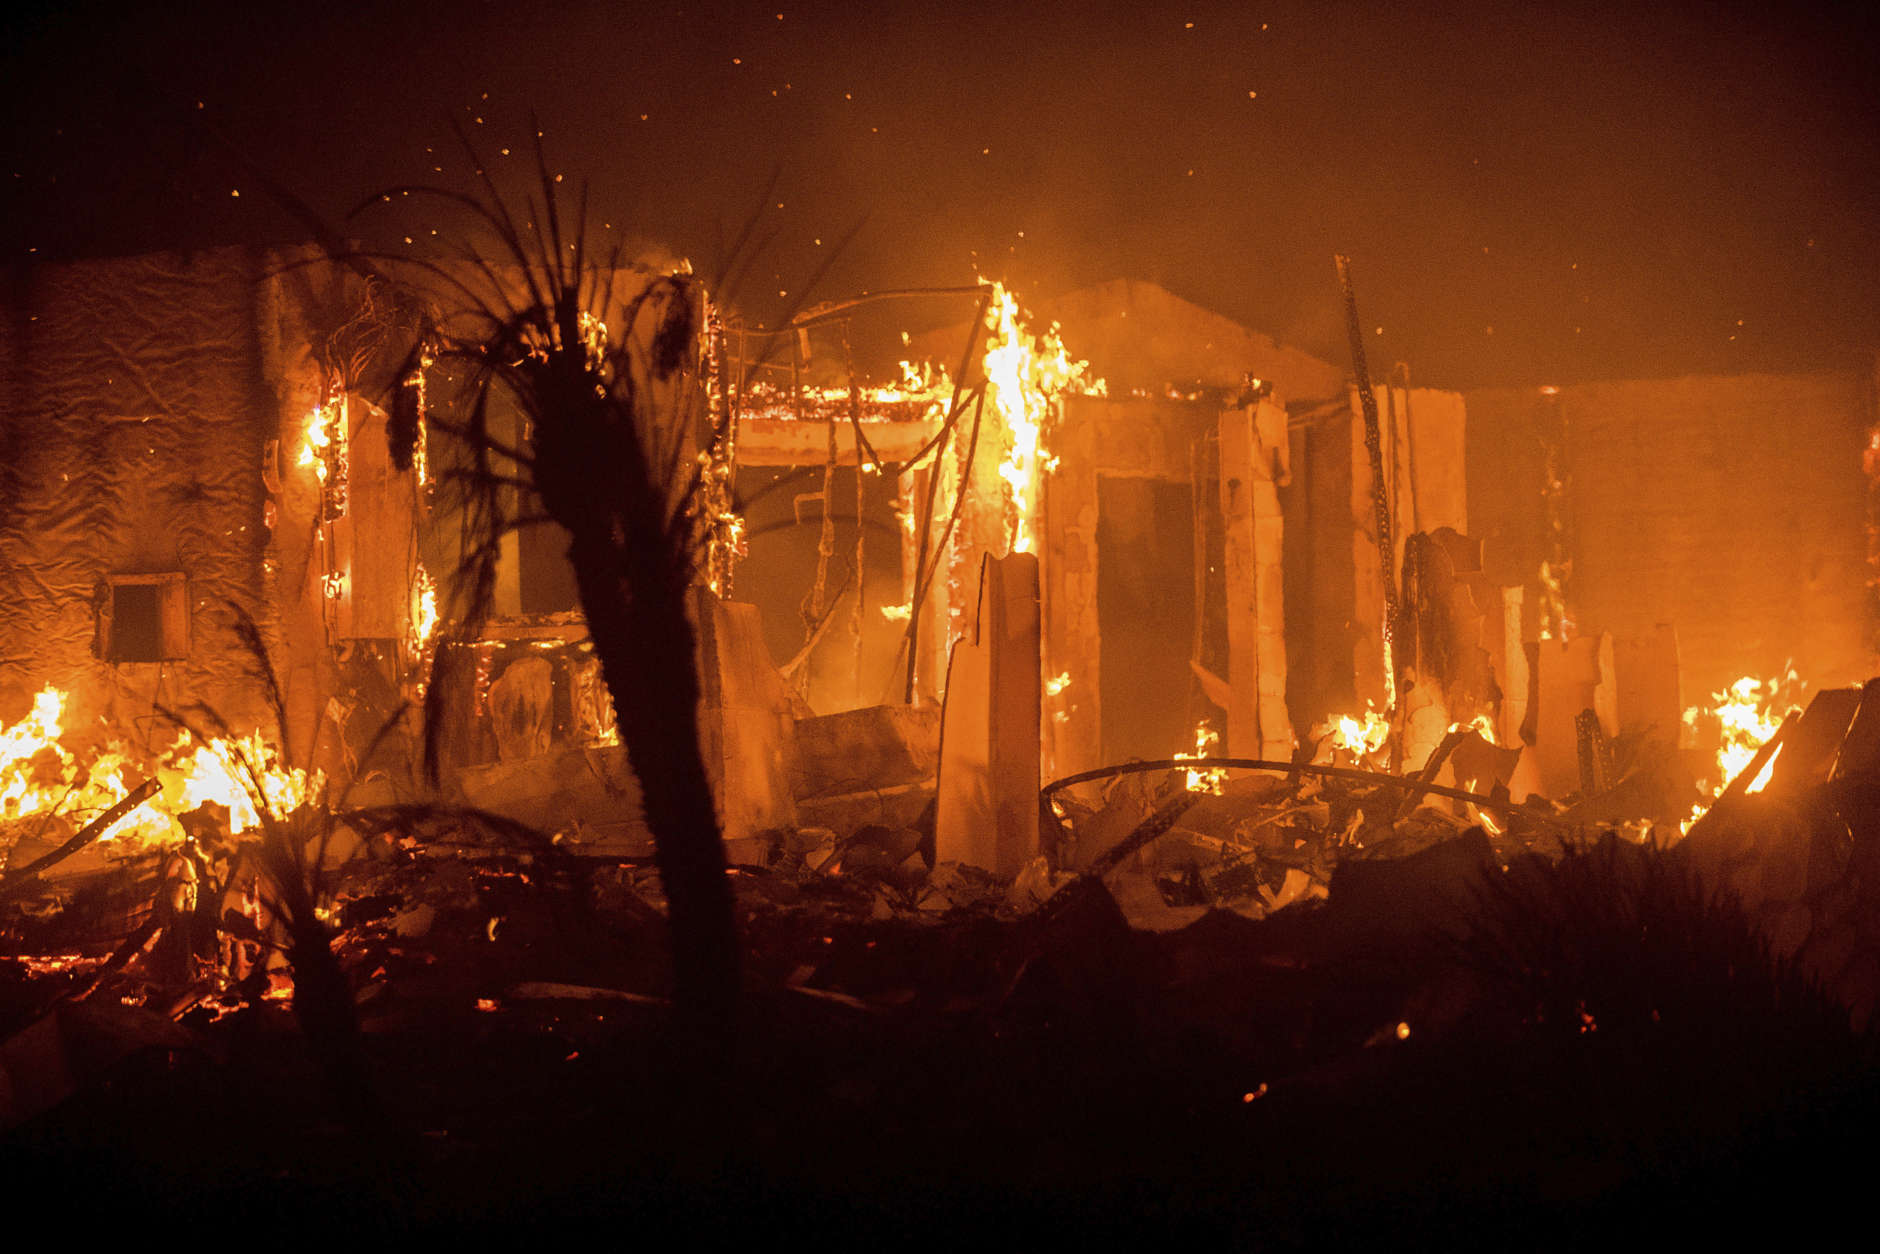 Flames consume a structure as the Lilac fire burns in Bonsai, Calif., on Friday, Dec. 8, 2017. The blaze burned numerous structures and thousands of acres according to fire officials. Wind-swept blazes have forced tens of thousands of evacuations and destroyed dozens of homes in Southern California. (AP Photo/Noah Berger)